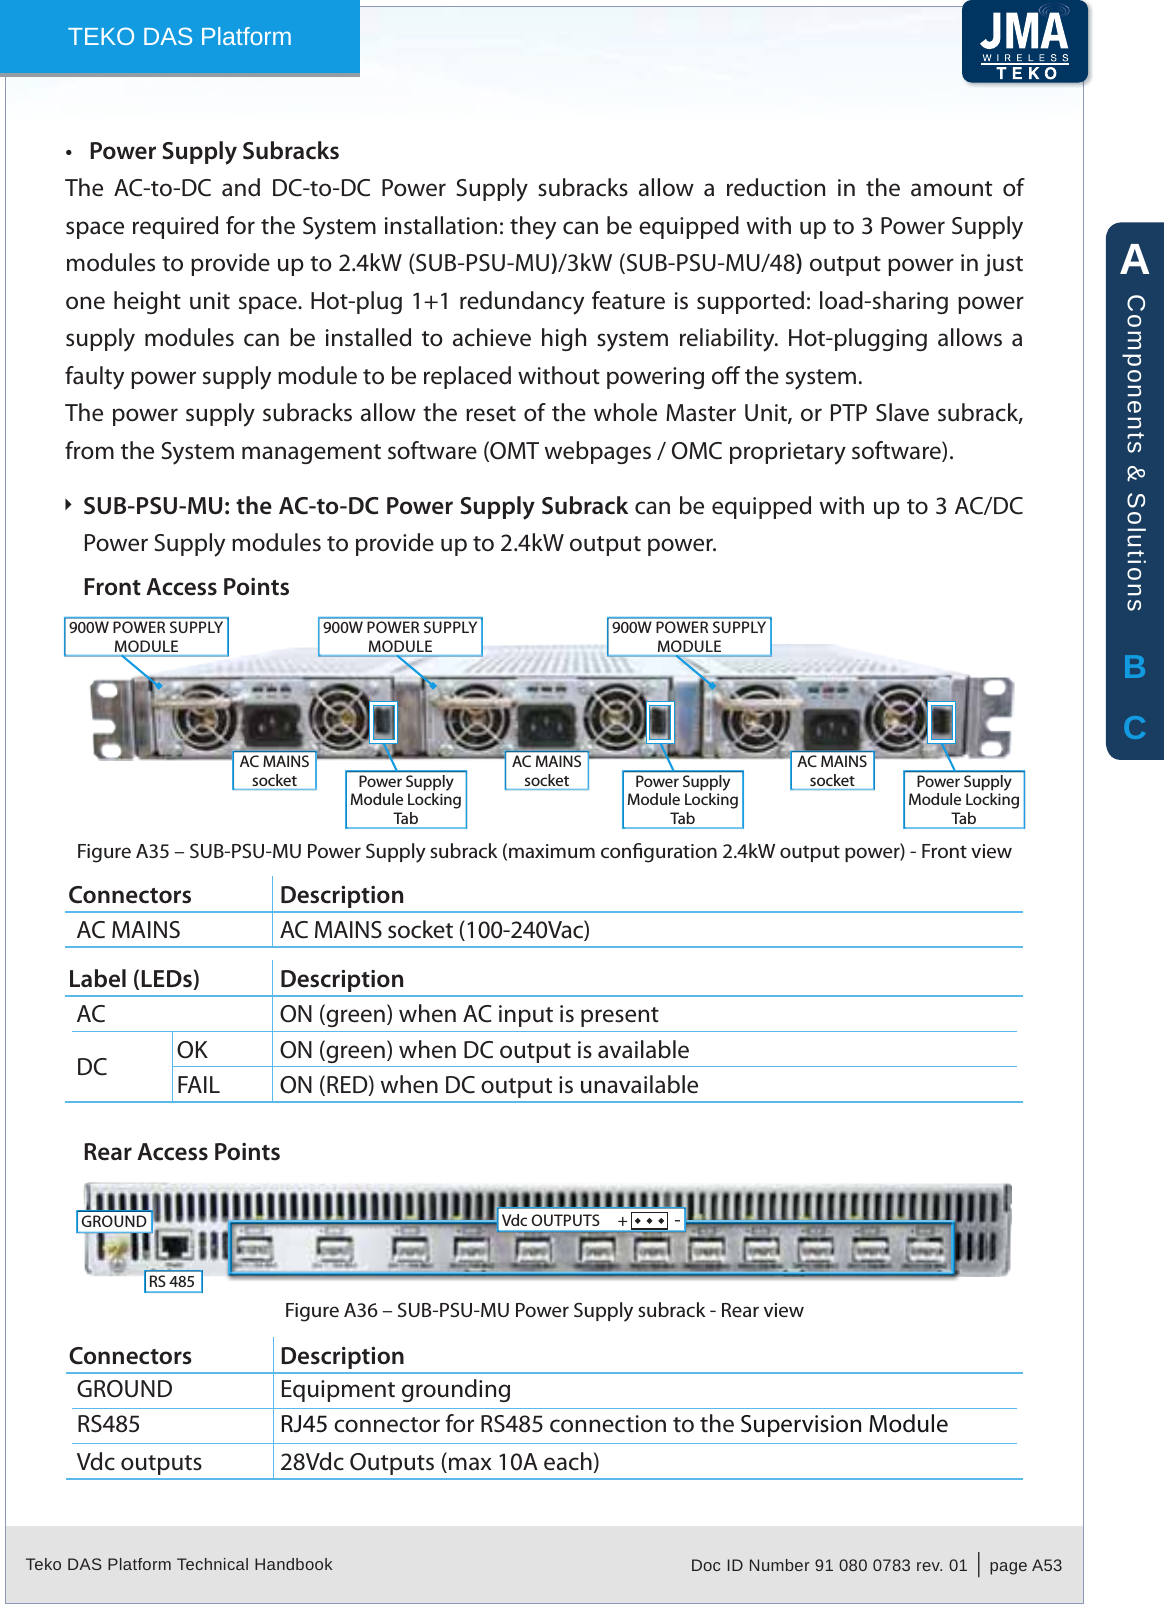 Teko DAS Platform Technical Handbook Doc ID Number 91 080 0783 rev. 01  |  page A53TEKO DAS PlatformPower Supply Subracks•The  AC-to-DC  and  DC-to-DC  Power  Supply  subracks  allow  a  reduction  in  the  amount  of space required for the System installation: they can be equipped with up to 3 Power Supply modules to provide up to 2.4kW (SUB-PSU-MU)/3kW (SUB-PSU-MU/48) output power in just one height unit space. Hot-plug 1+1 redundancy feature is supported: load-sharing power supply  modules  can  be  installed  to  achieve  high  system  reliability.  Hot-plugging  allows  a faulty power supply module to be replaced without powering o the system.The power supply subracks allow the reset of the whole Master Unit, or PTP Slave subrack, from the System management software (OMT webpages / OMC proprietary software).SUB-PSU-MU: the AC-to-DC Power Supply Subrack  Ìcan be equipped with up to 3 AC/DC Power Supply modules to provide up to 2.4kW output power.Front Access Points900W POWER SUPPLY MODULE900W POWER SUPPLY MODULE900W POWER SUPPLY MODULEAC MAINSsocket Power Supply Module Locking TabPower Supply Module Locking TabPower Supply Module Locking TabAC MAINSsocketAC MAINSsocketSUB-PSU-MU Power Supply subrack (maximum conguration 2.4kW output power) - Front viewFigure A35 – Connectors DescriptionAC MAINS AC MAINS socket (100-240Vac)Label (LEDs) DescriptionAC ON (green) when AC input is presentDC OK ON (green) when DC output is availableFAIL ON (RED) when DC output is unavailableRear Access PointsRS 485GROUND Vdc OUTPUTS     +    - SUB-PSU-MU Power Supply subrack - Rear viewFigure A36 – Connectors DescriptionGROUND Equipment groundingRS485 RJ45 connector for RS485 connection to the Supervision ModuleVdc outputs 28Vdc Outputs (max 10A each)ABCComponents &amp; Solutions